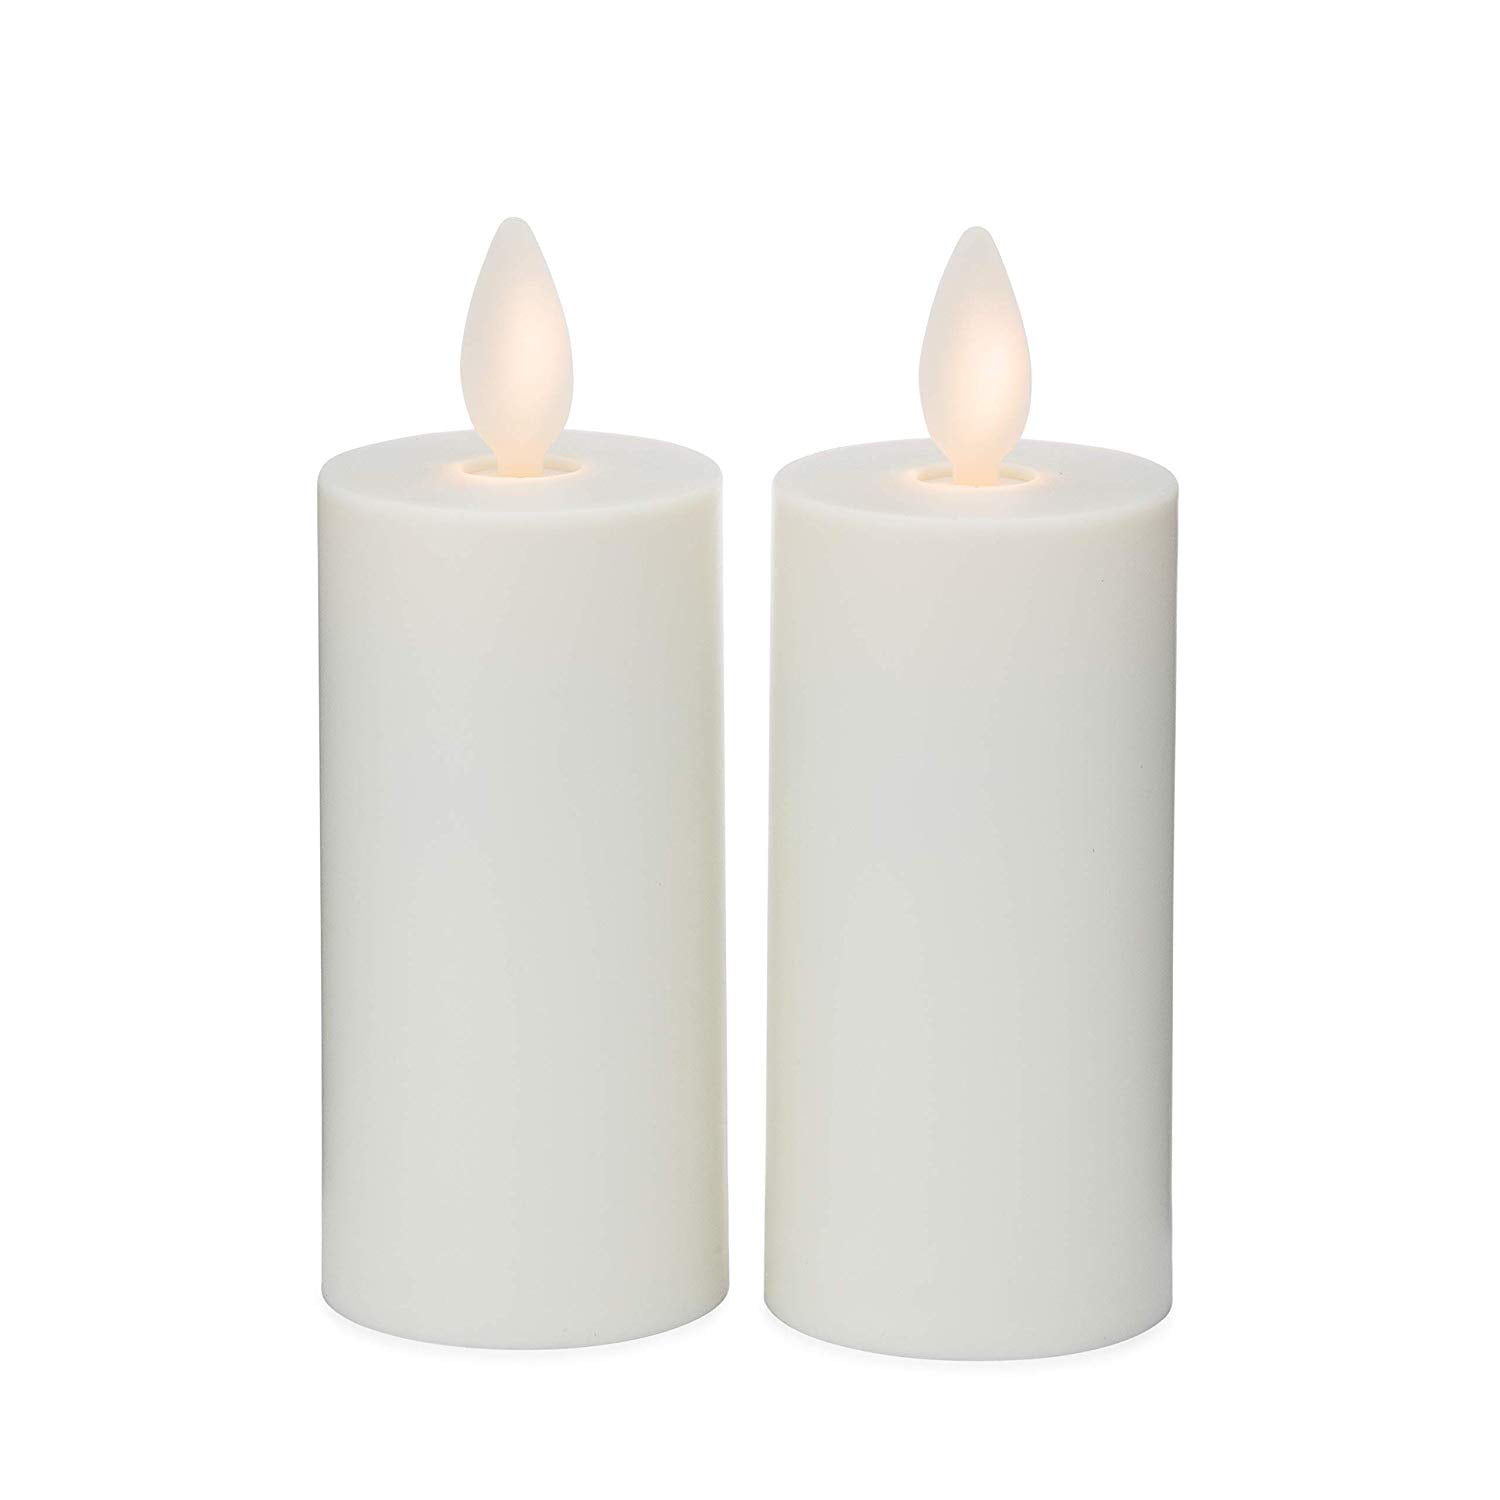 D 12-White Unscented Votive Candles~1-1/2" D x 1-3/8" Tall~8-10 Hour Burn Time~ 